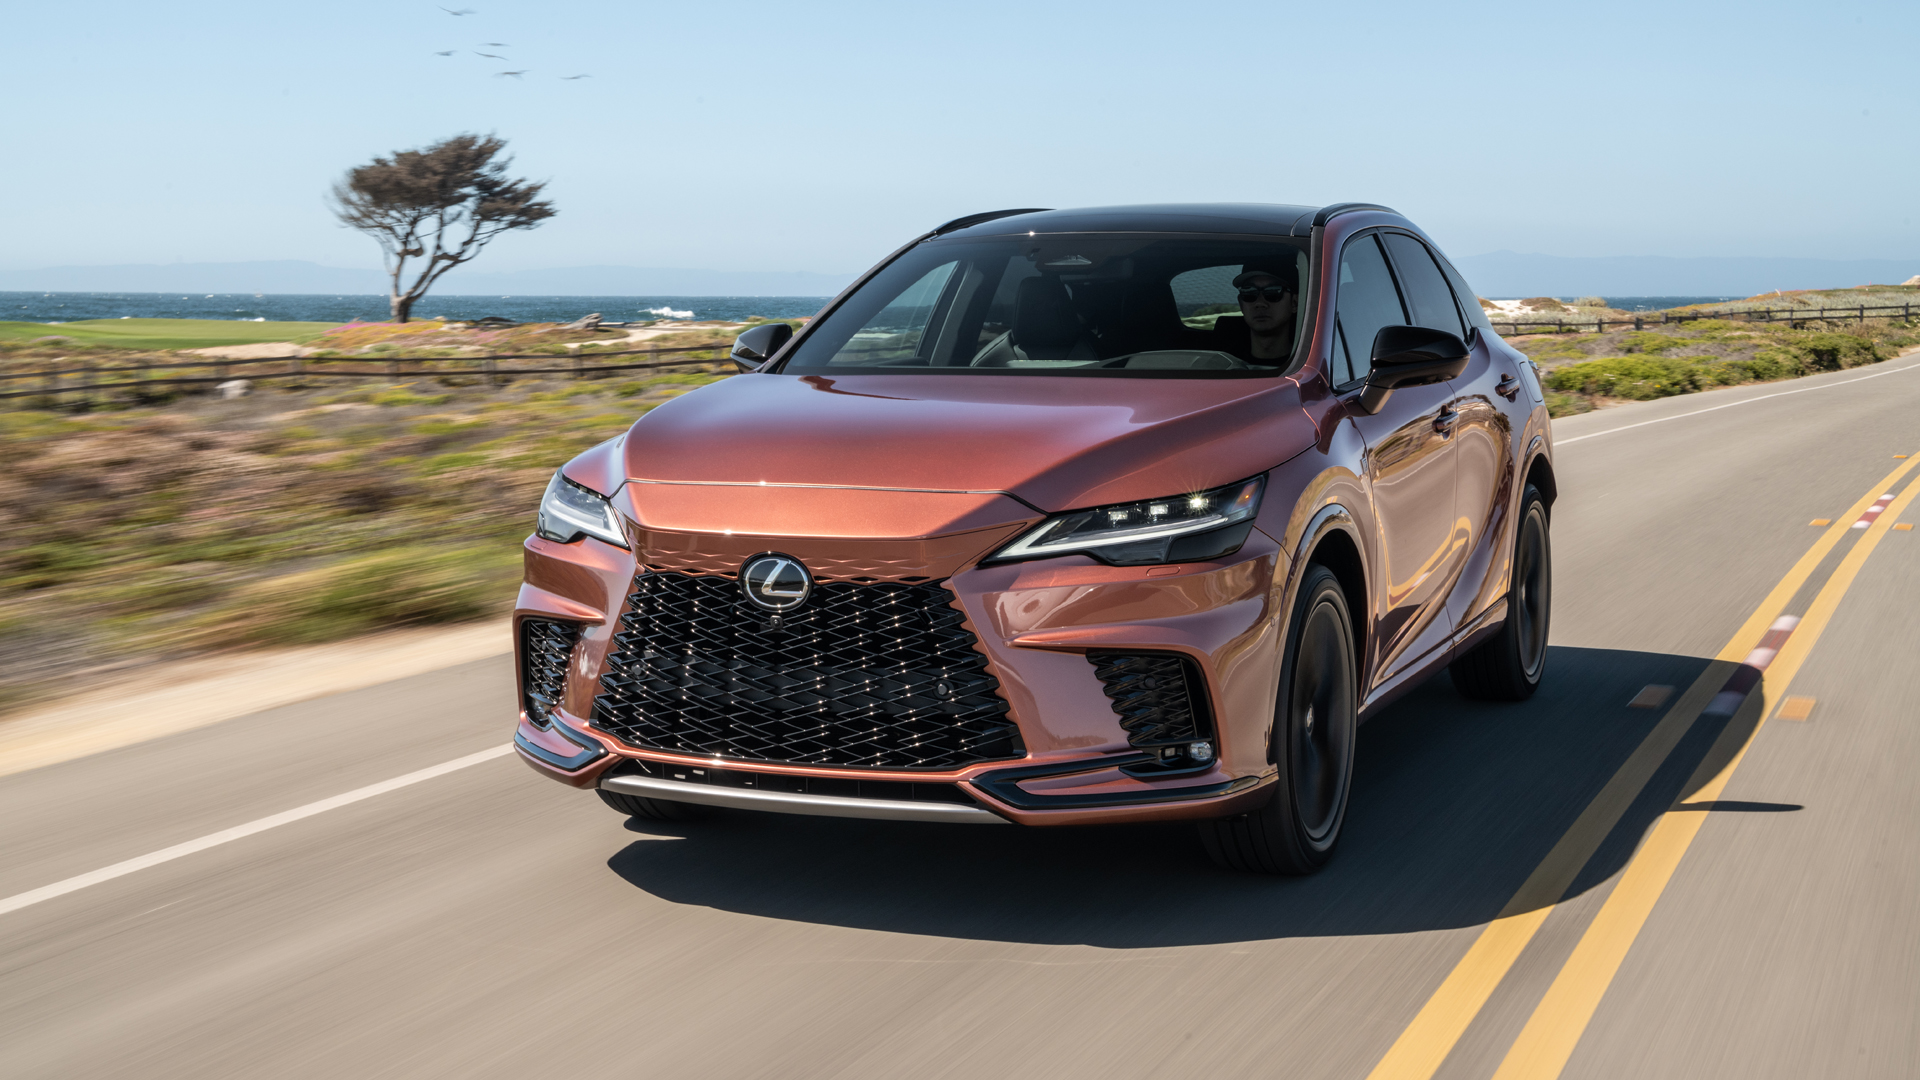 2023 Lexus RX 500h F Performance in Copper Crest Photo Gallery